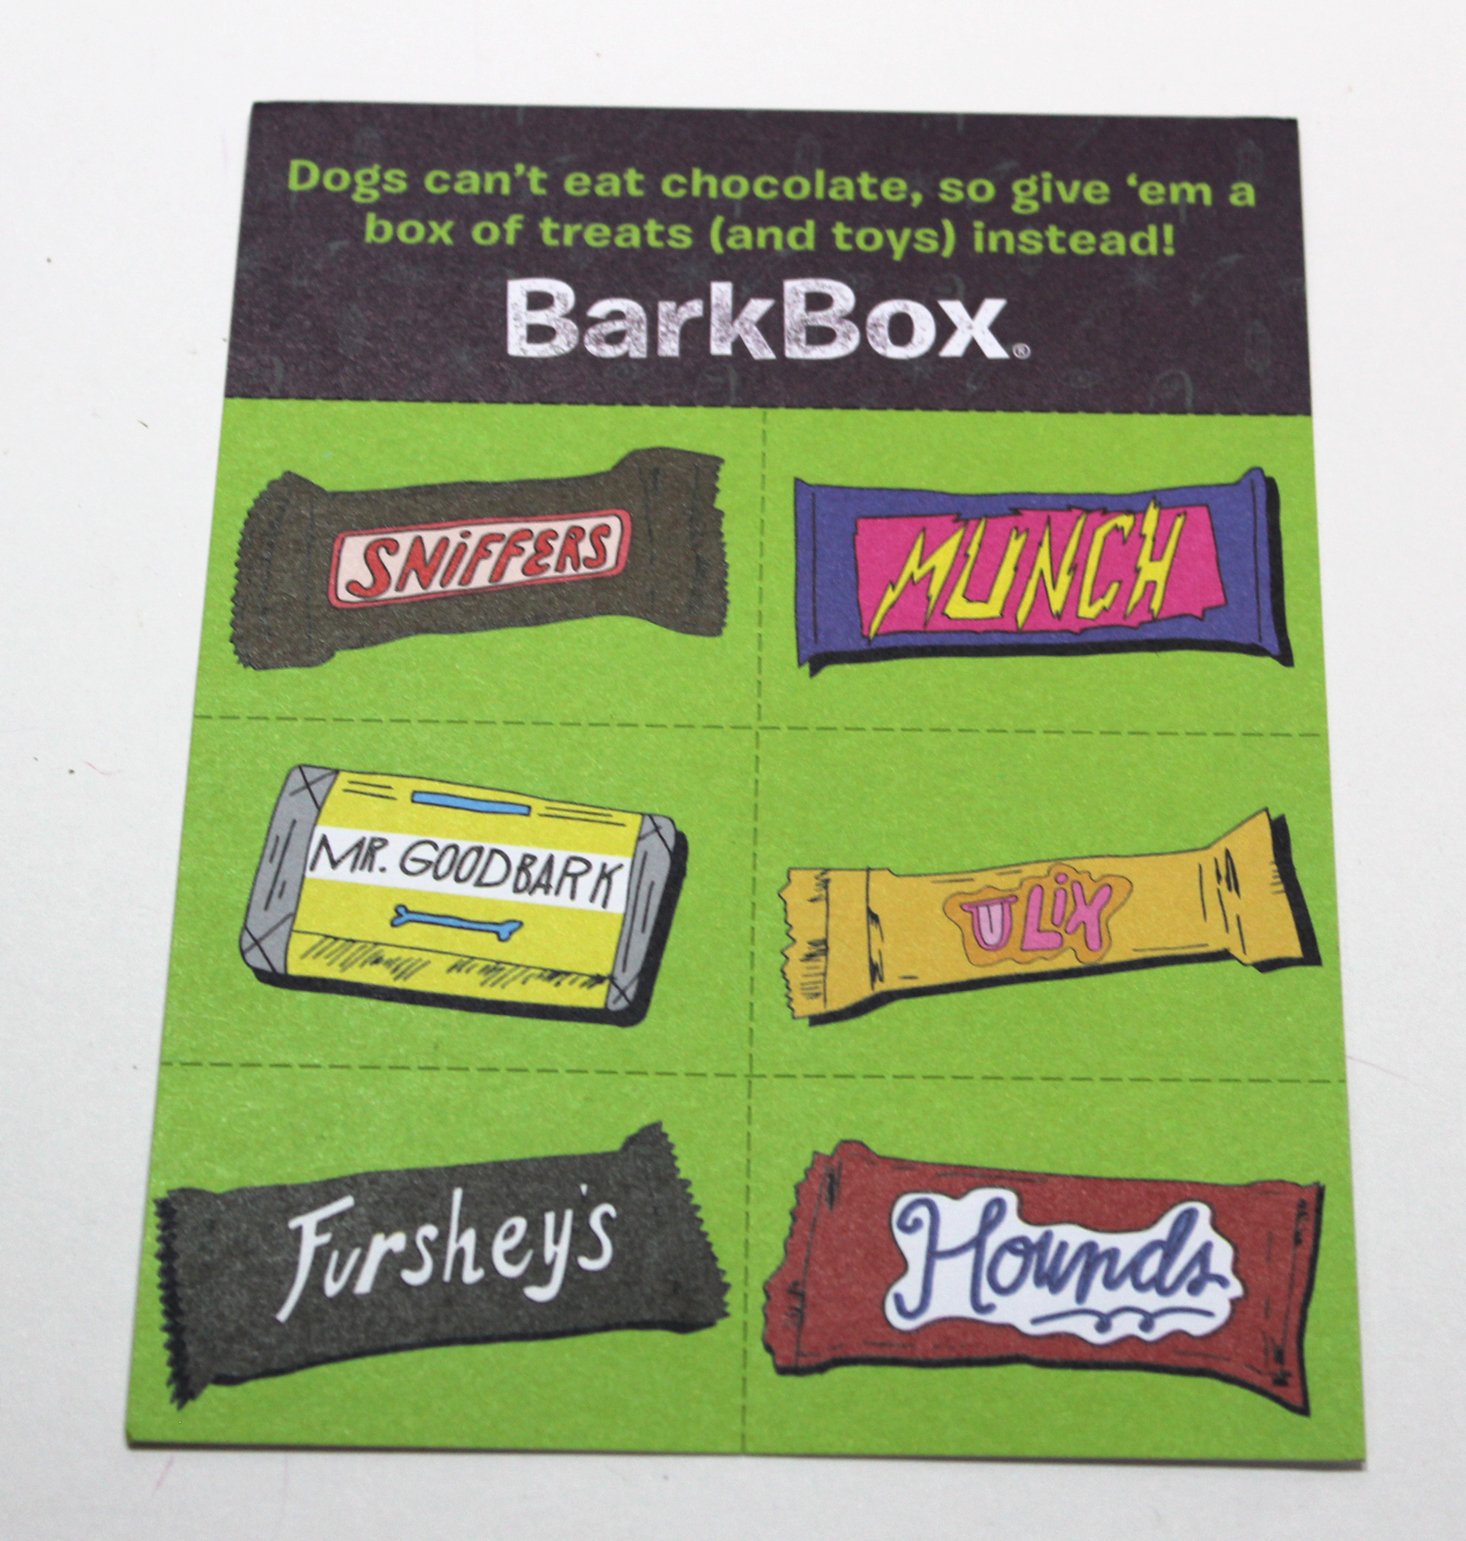 barkbox-large-october-2016-coupons-front